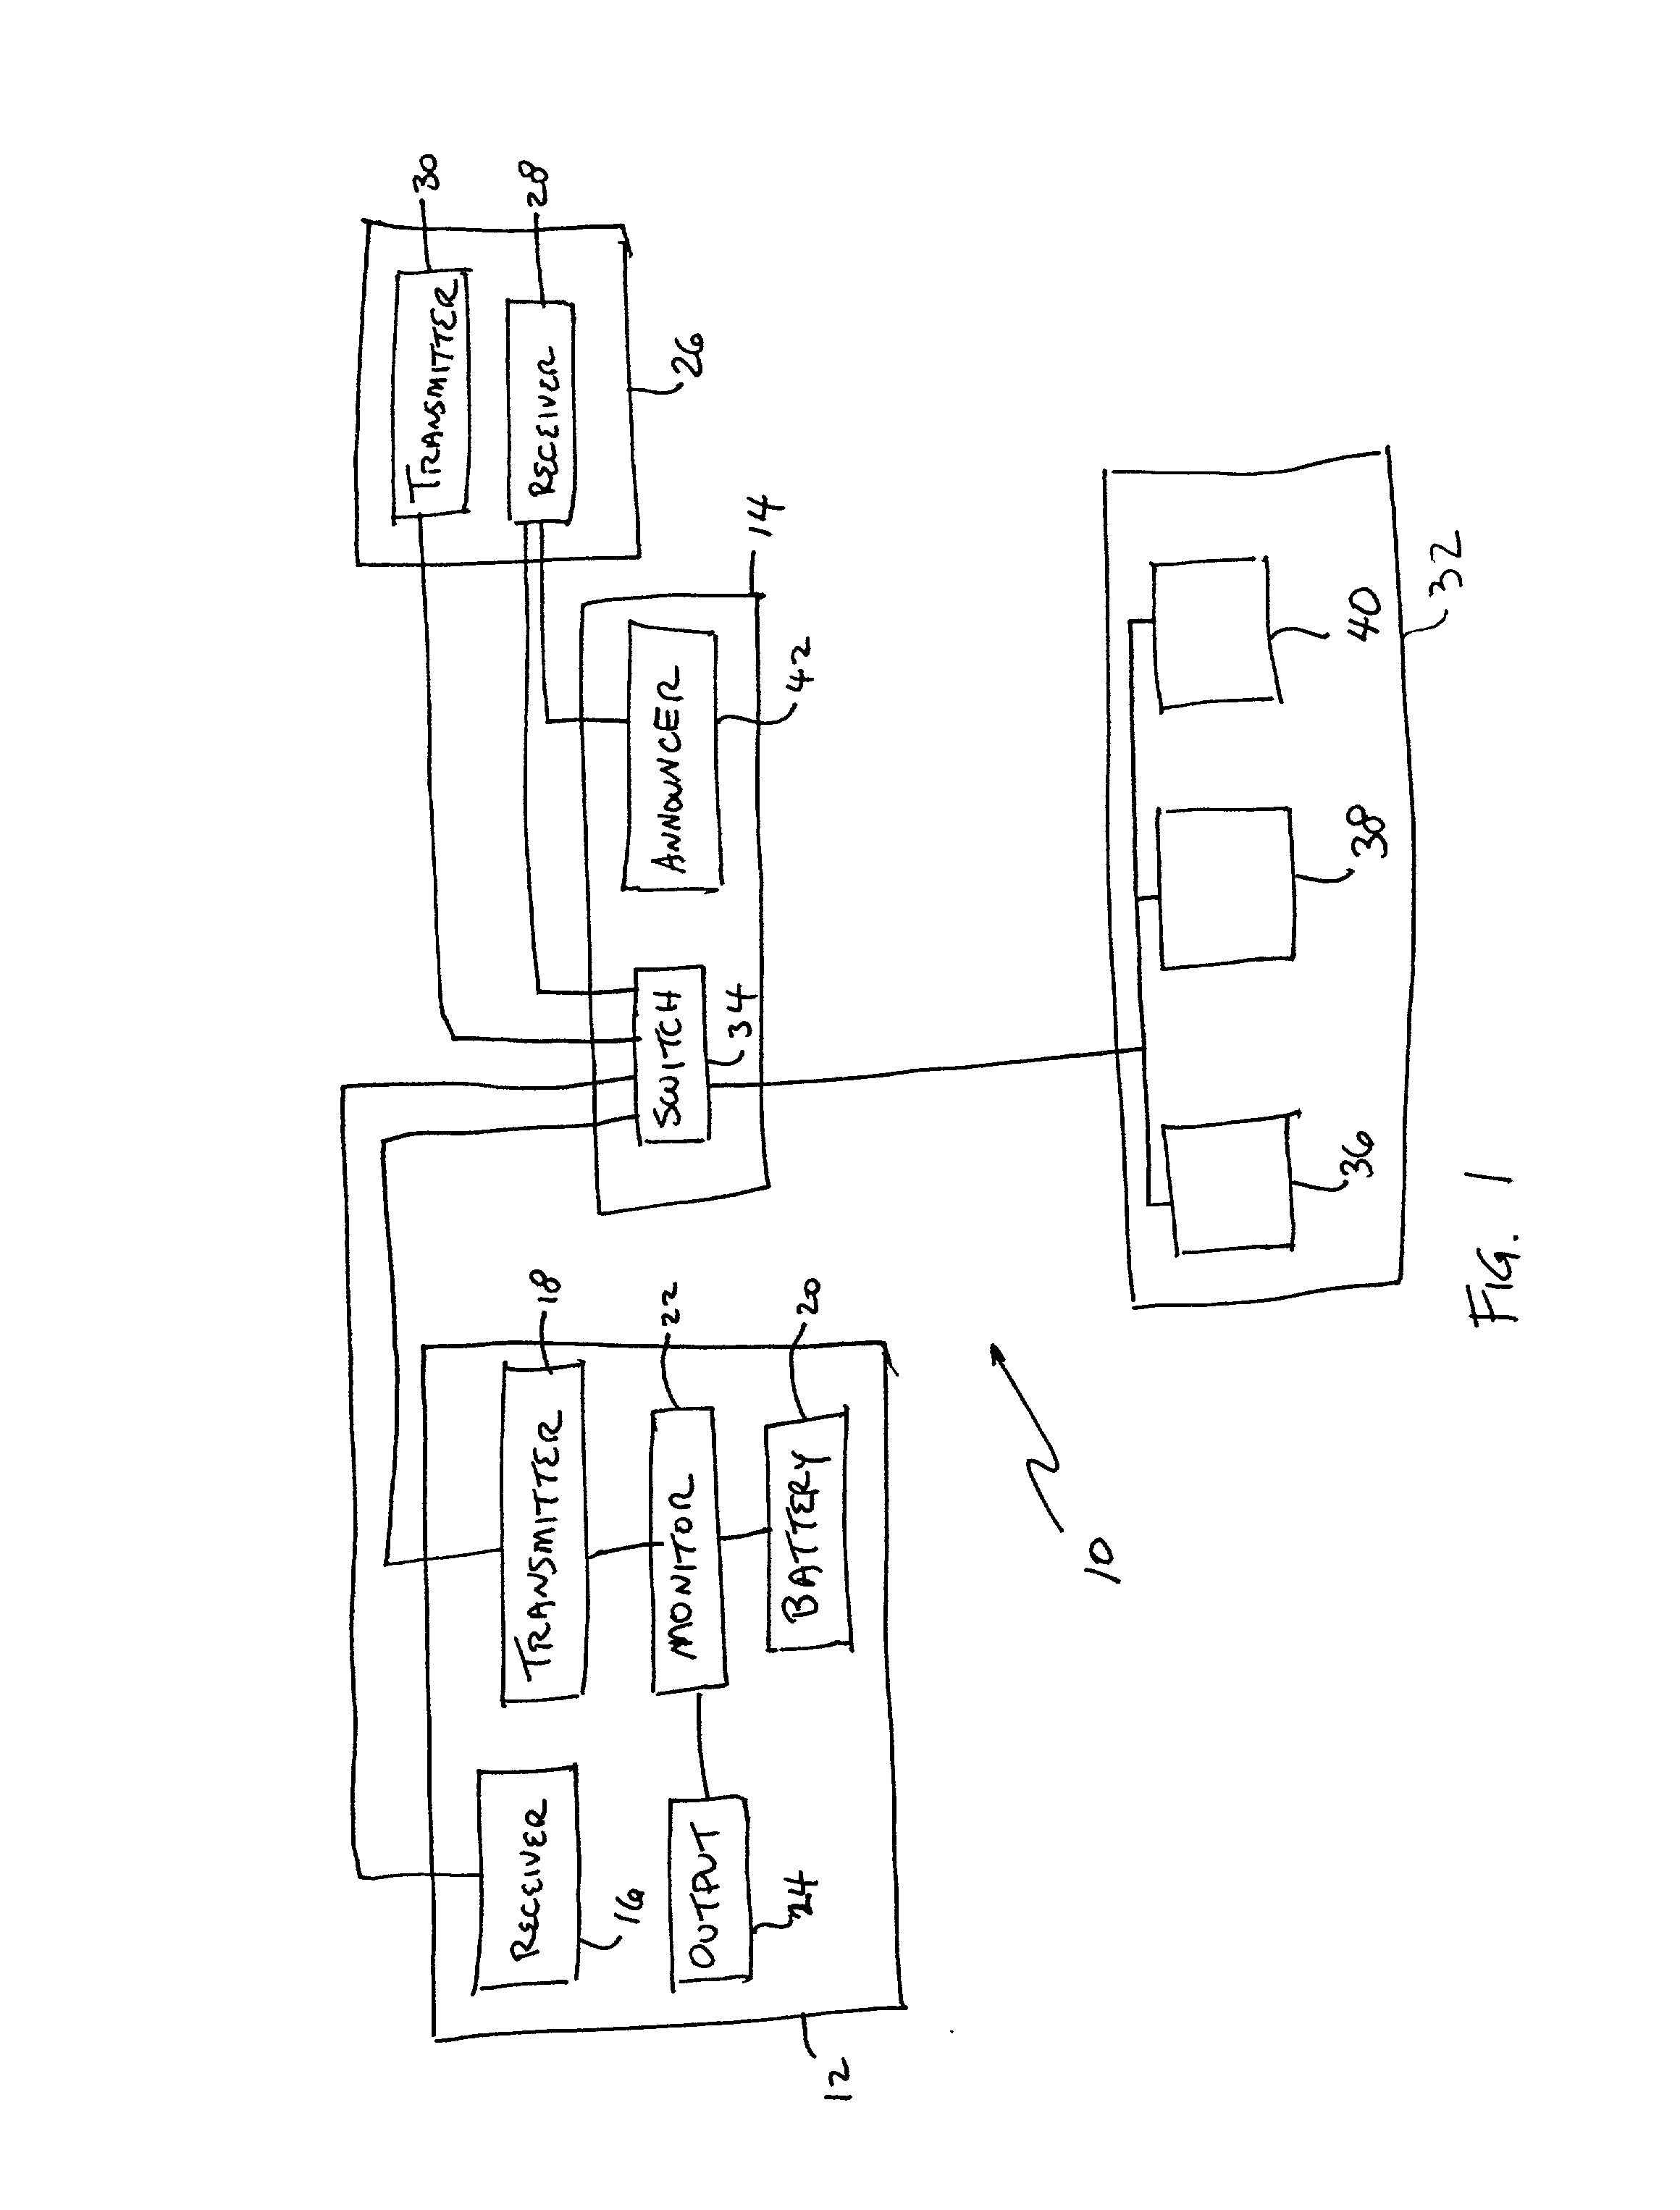 Method and system for transferring a cellular phone call